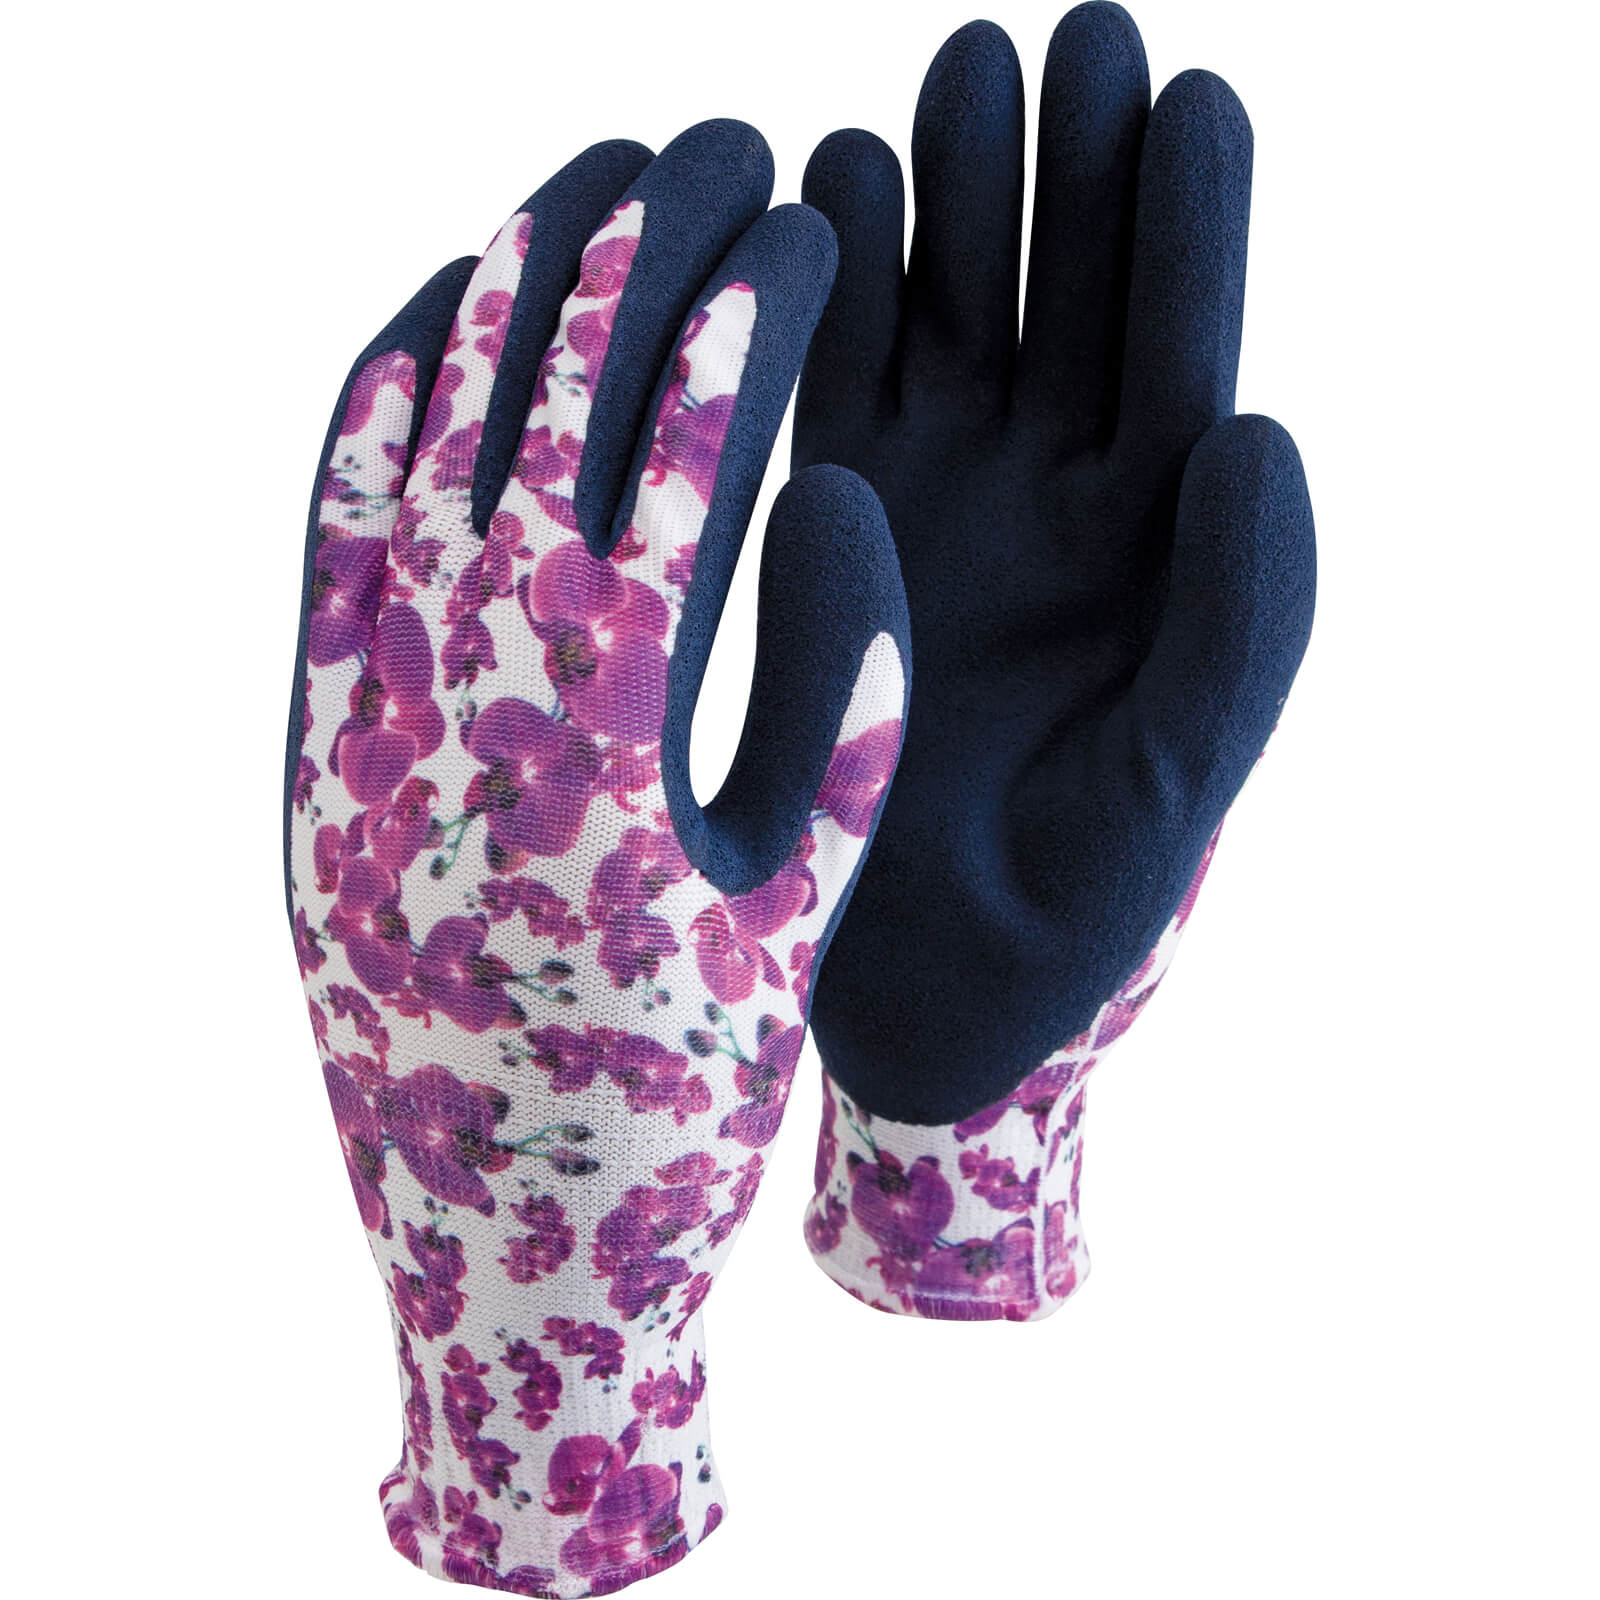 Image of Town and Country Mastergrip Patterns Garden Gloves Cherry Blossom M